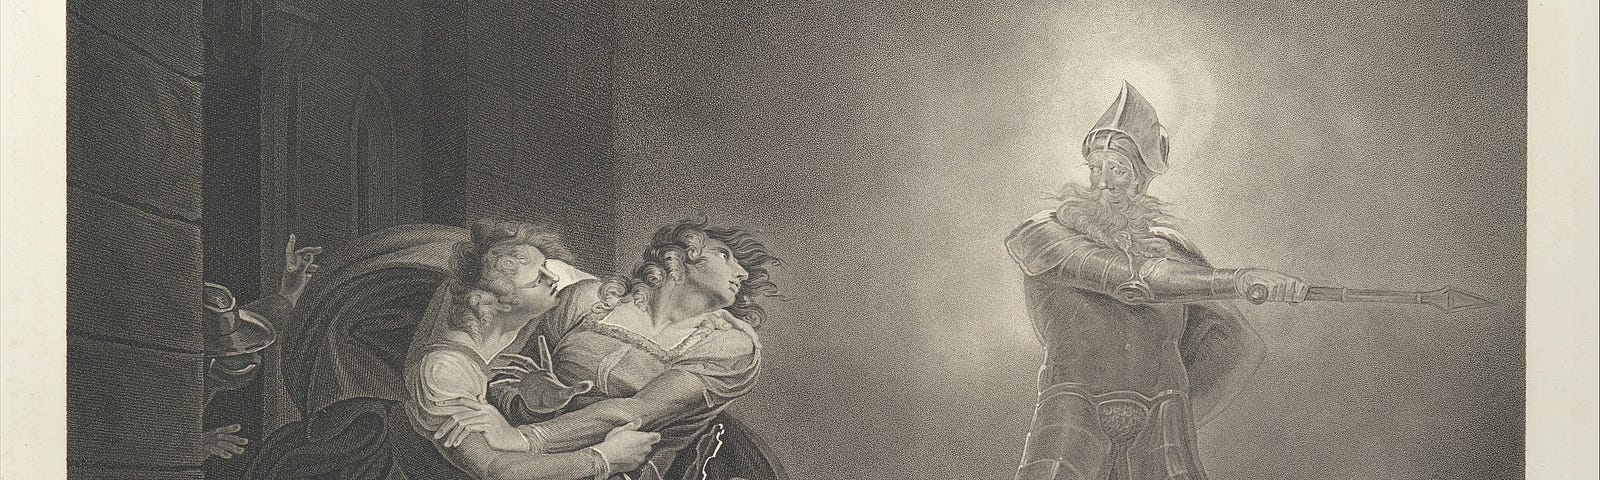 Black and white print of Hamlet, Horatio, & Marcellus and the Ghost on stage